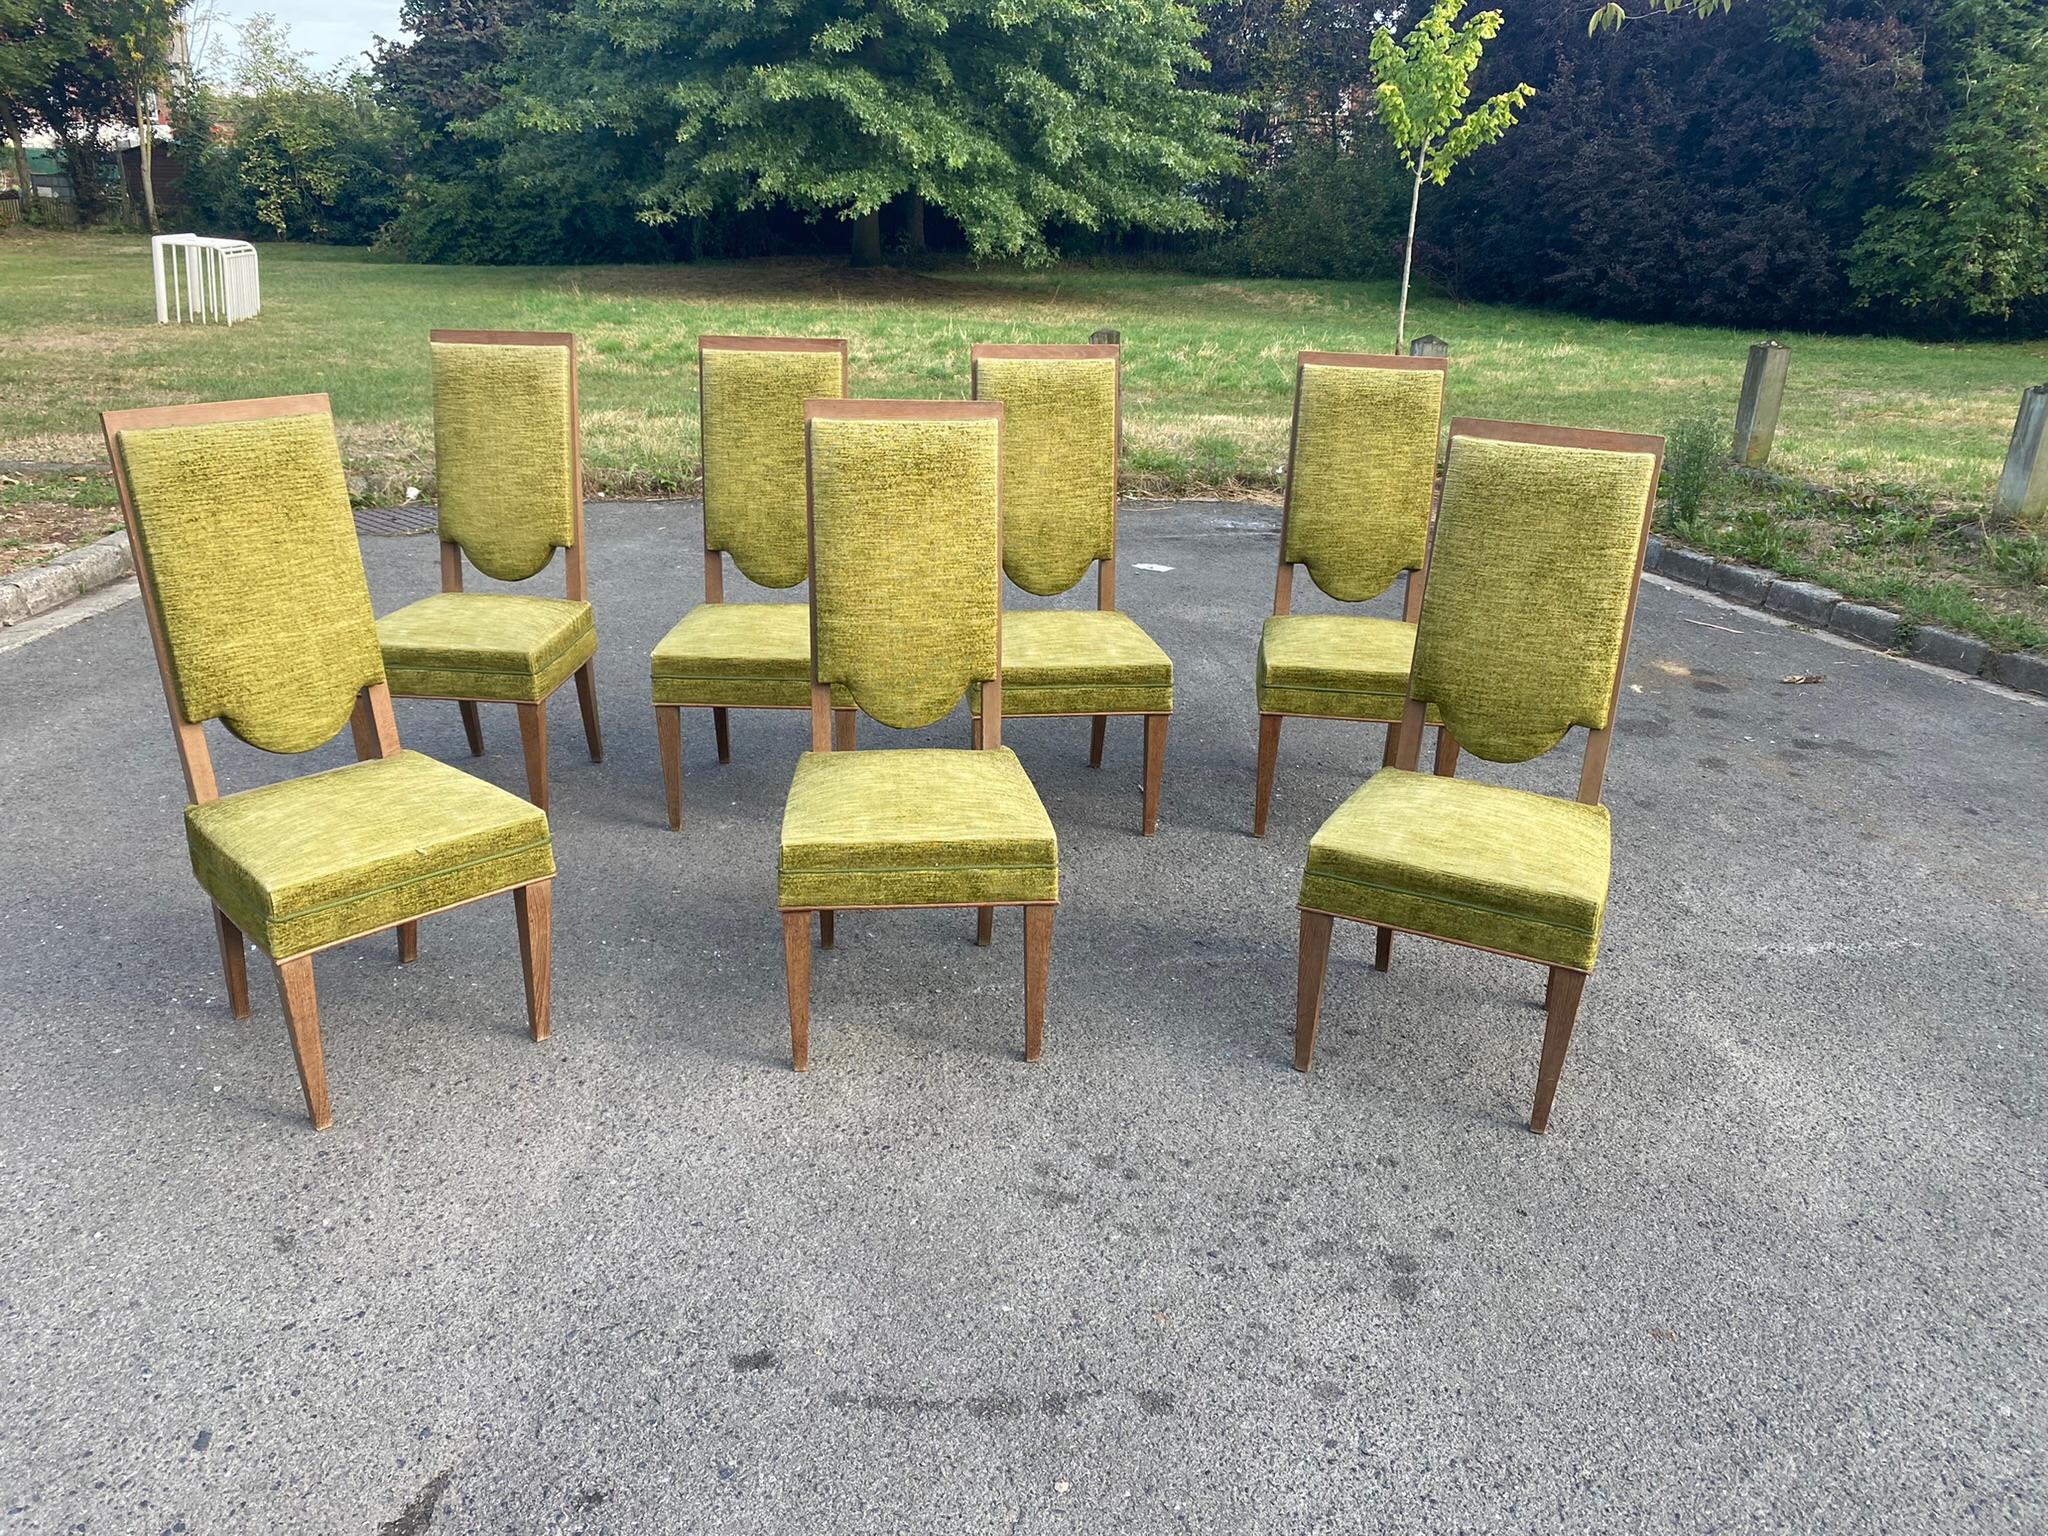 set of seven Art Deco chairs in oak circa 1930/1940 in the style of Maurice Jallot
was restored 3 years ago, the fabric is a little worn, but these chairs do not need to be glued, and the upholstery is in good condition, only the fabric needs to be